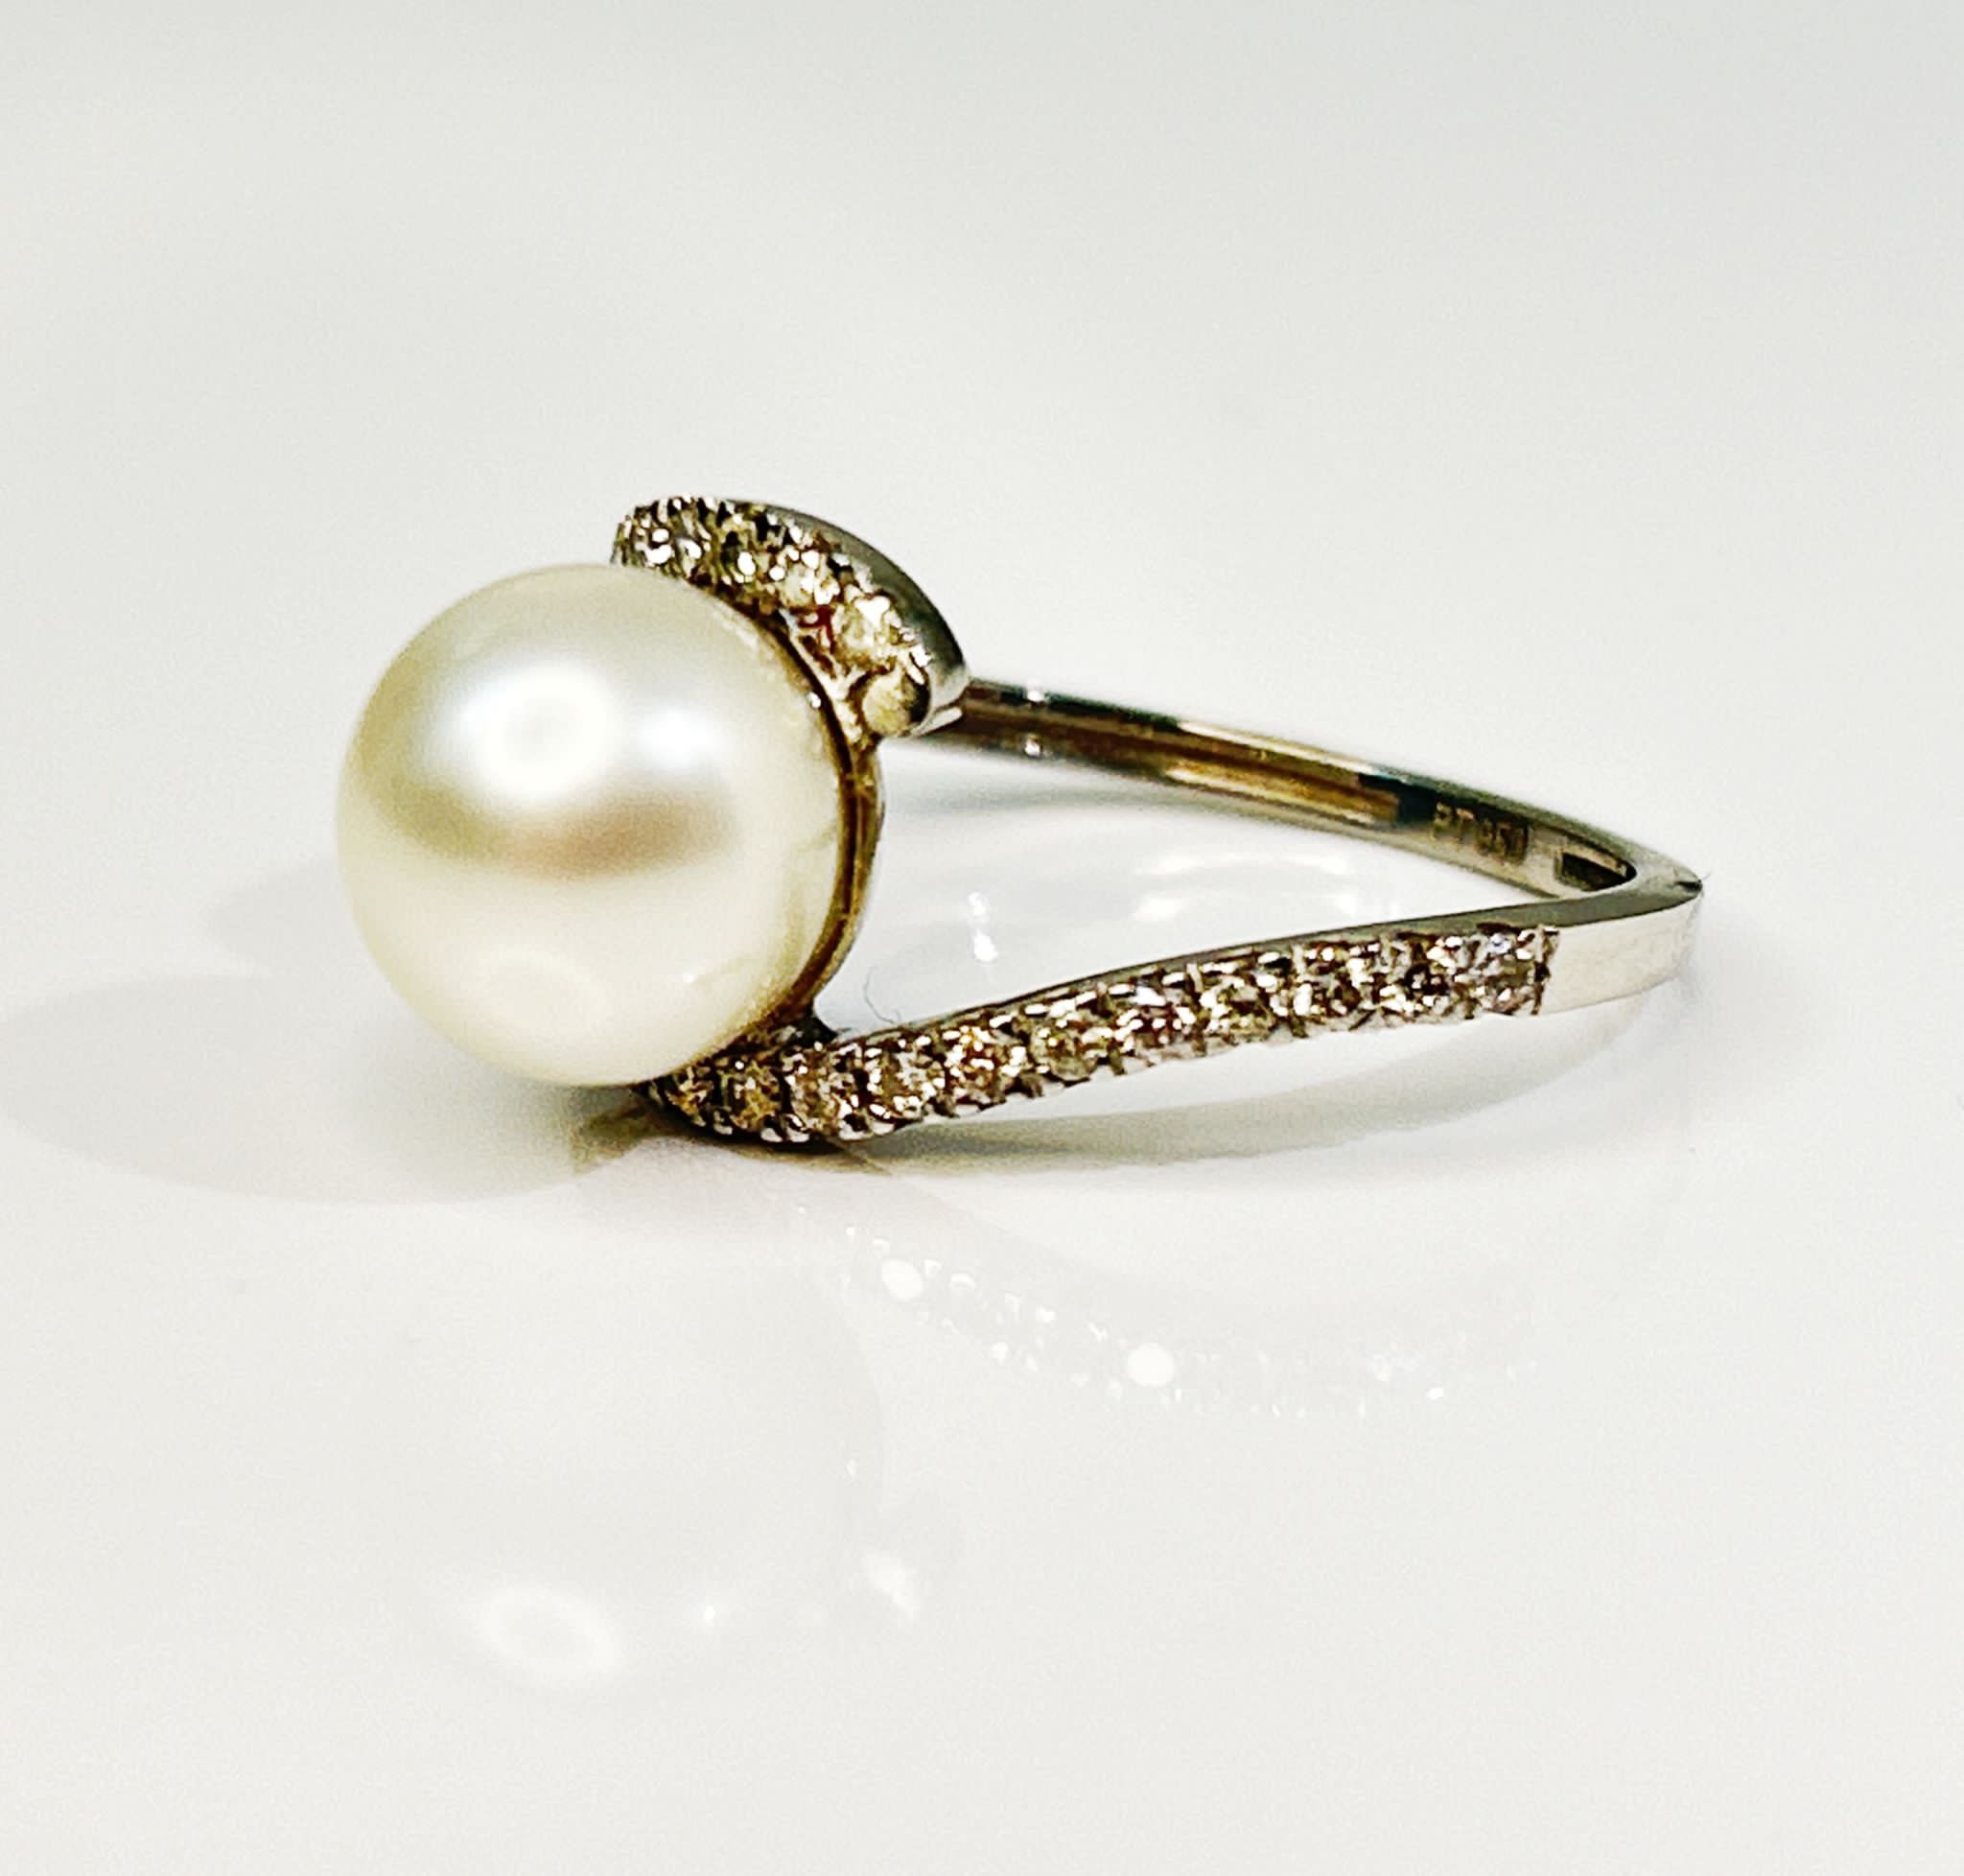 Beautiful 5.12 CT South Sea Pearl With Diamonds & Platinum Ring - Image 3 of 6